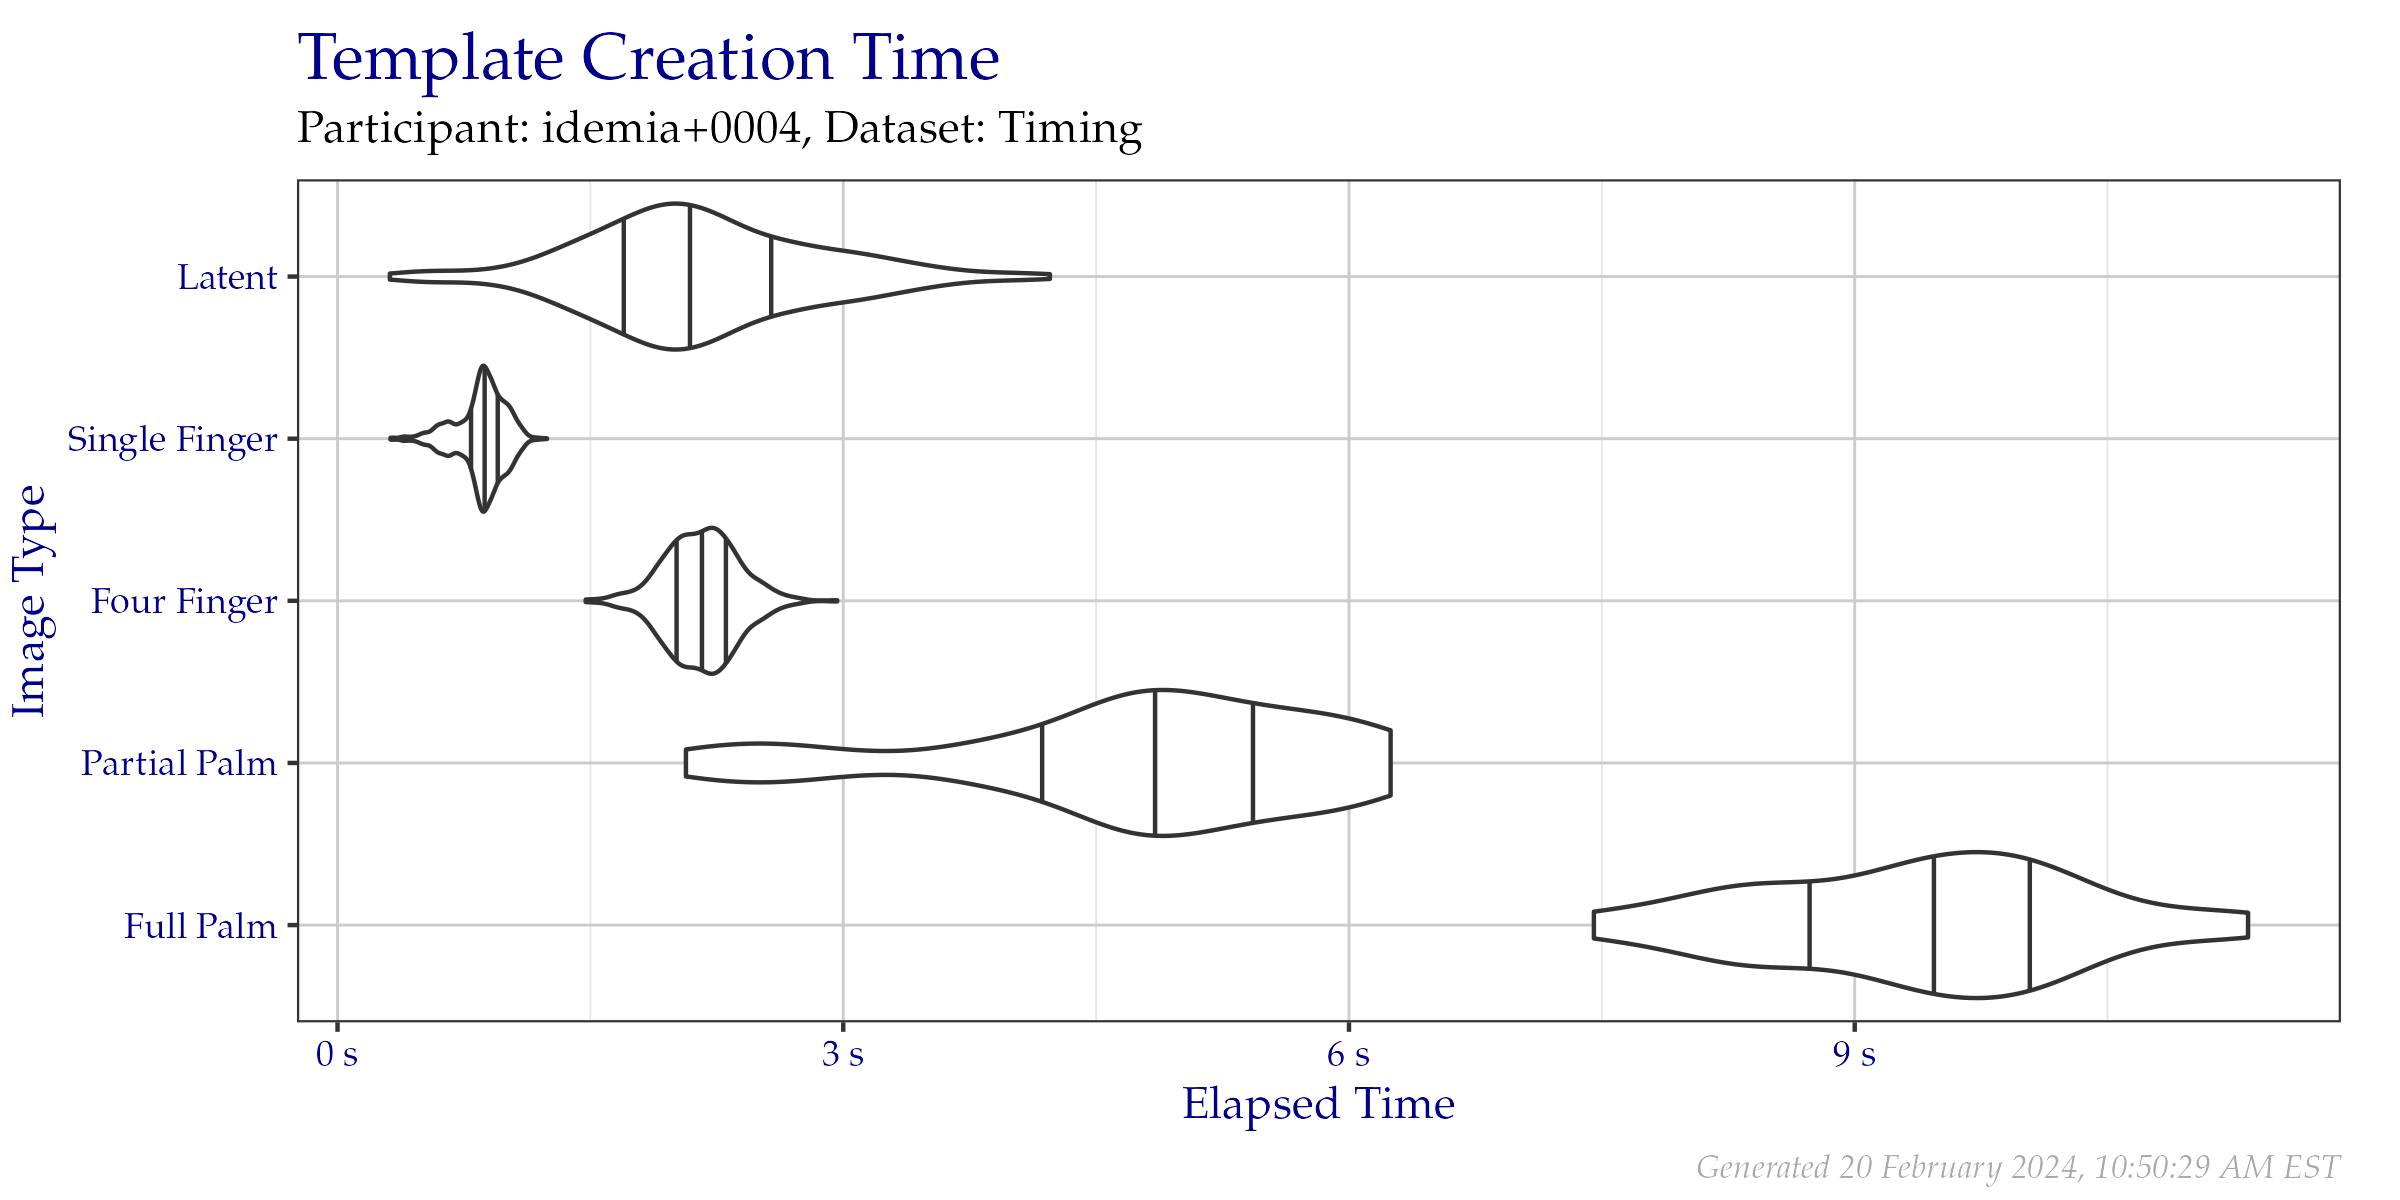 Violin plot of the duration of template creation in seconds for images from the Timing Sample dataset. Vertical lines from left to right indicate the 25\%, 50\%, and 75\% quantiles respectively.